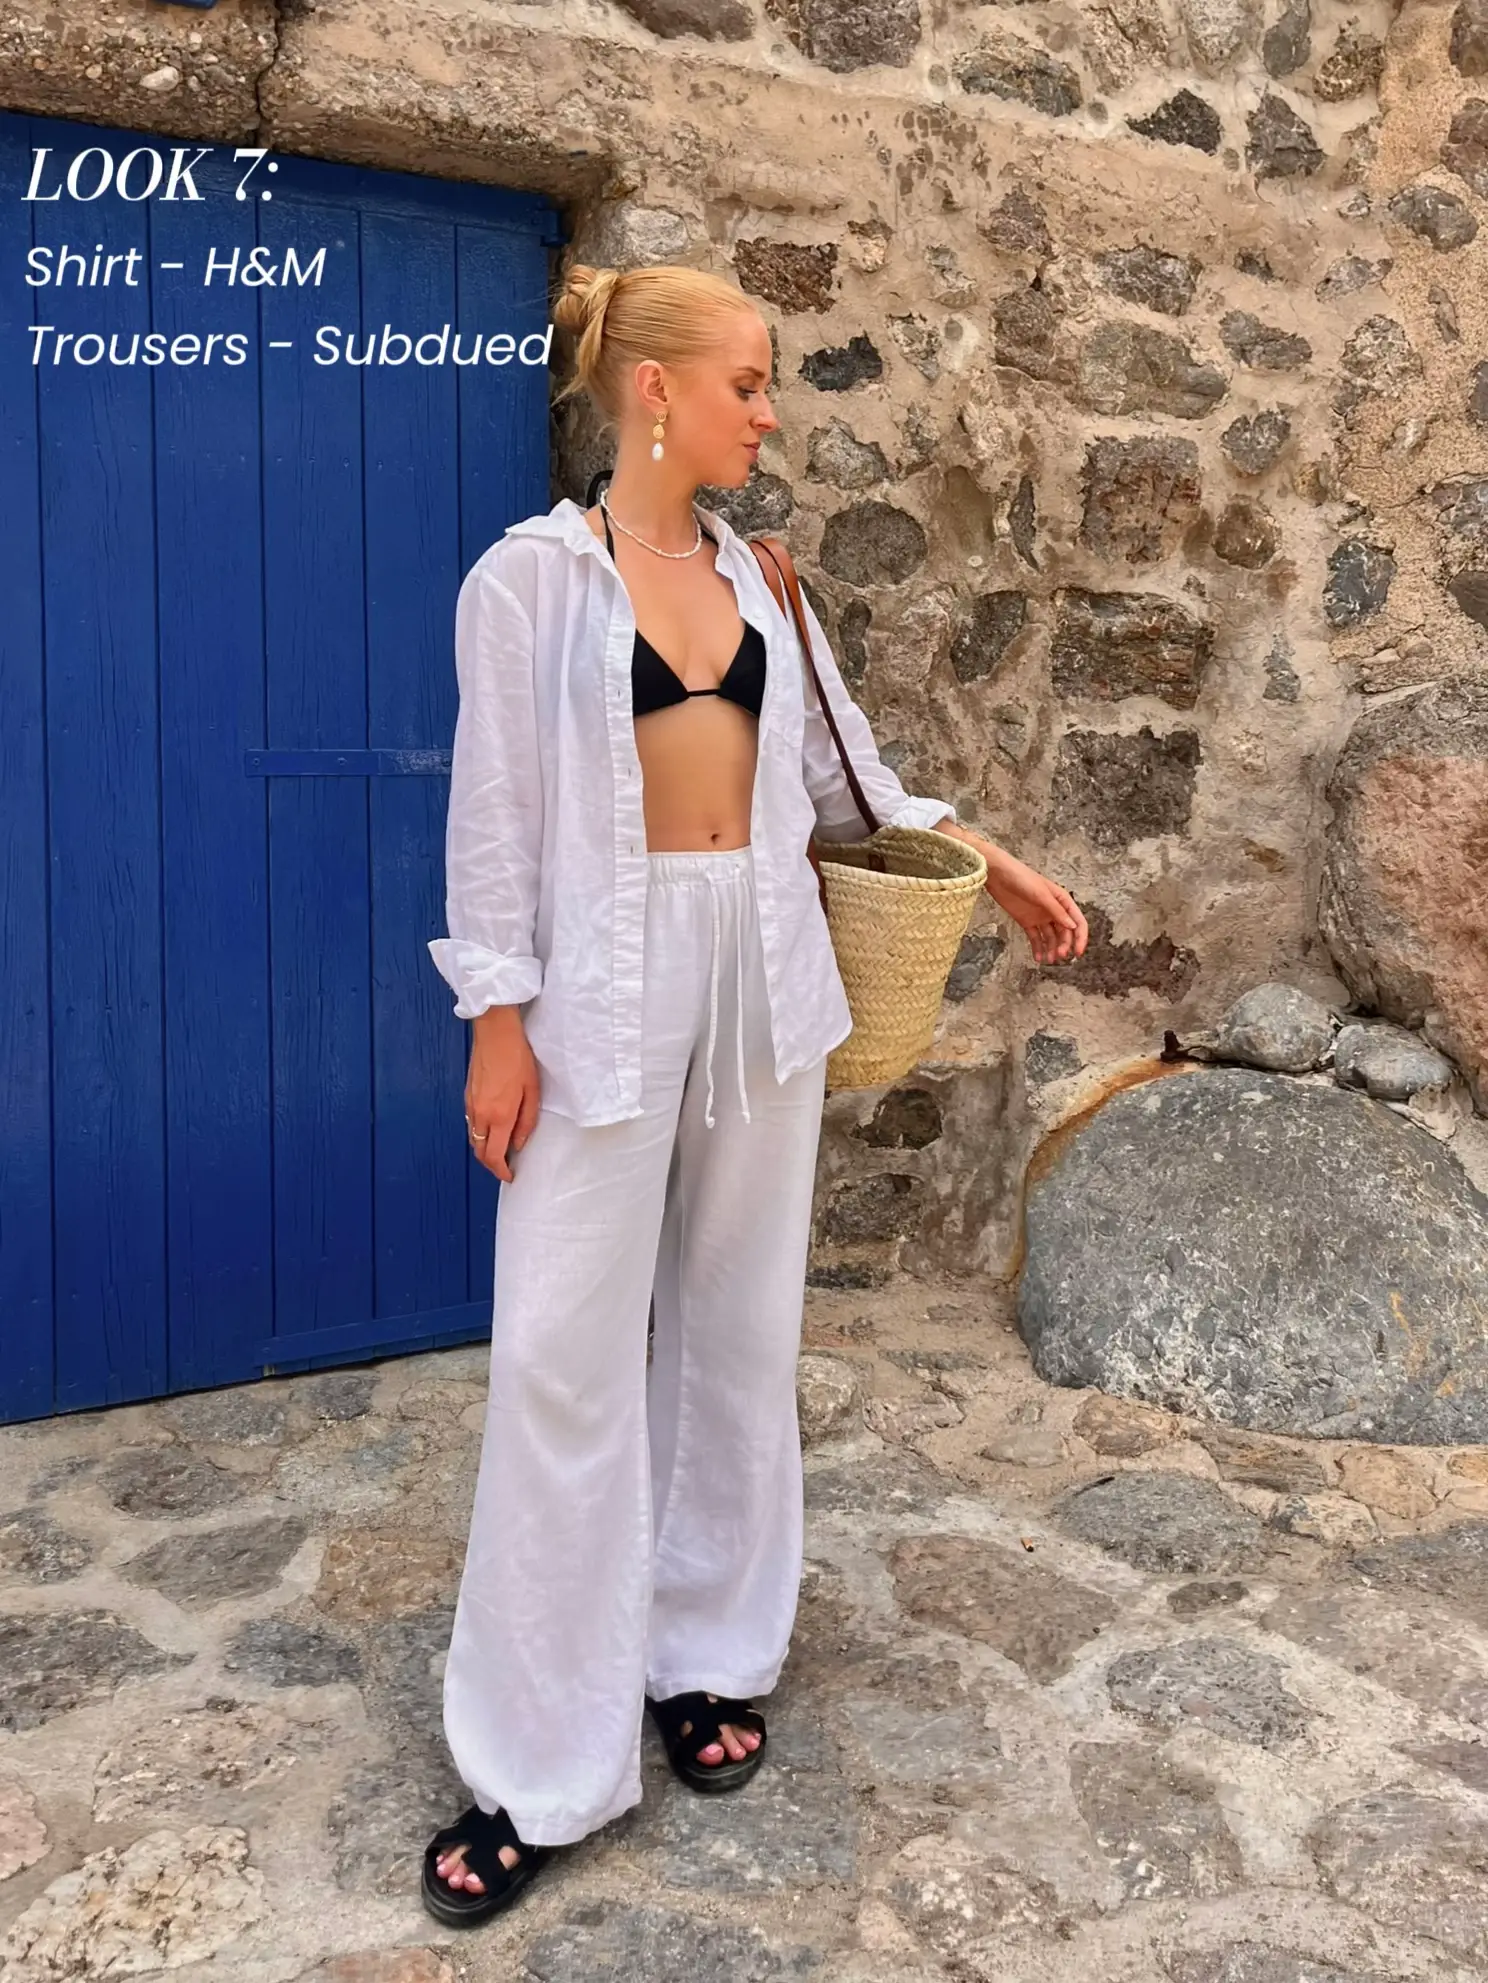 Subdued trousers - Gem